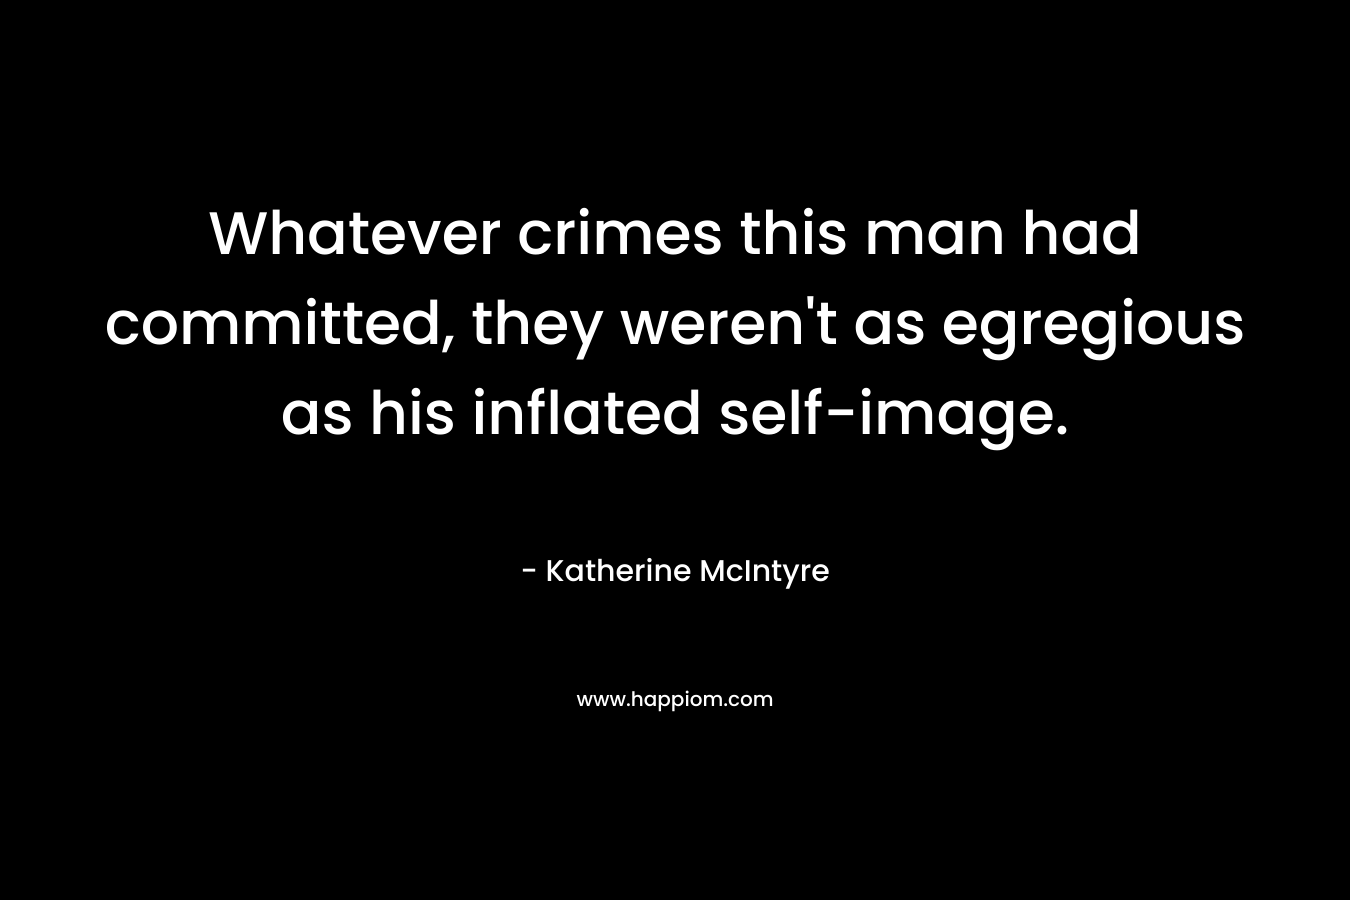 Whatever crimes this man had committed, they weren’t as egregious as his inflated self-image. – Katherine McIntyre